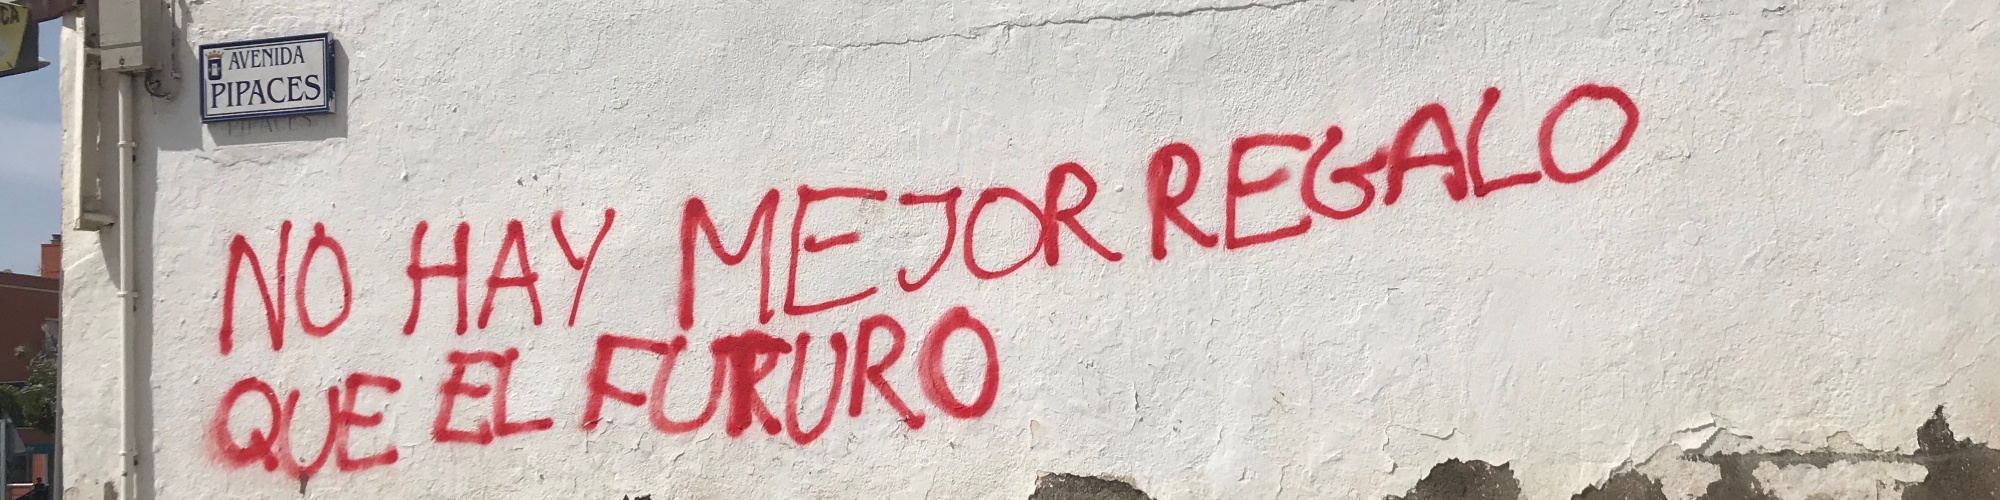 Image of graffiti on a wall in Almeria, written in Spanish, 'no hay mejor regalo que el futuro' - there is no better gift than the future